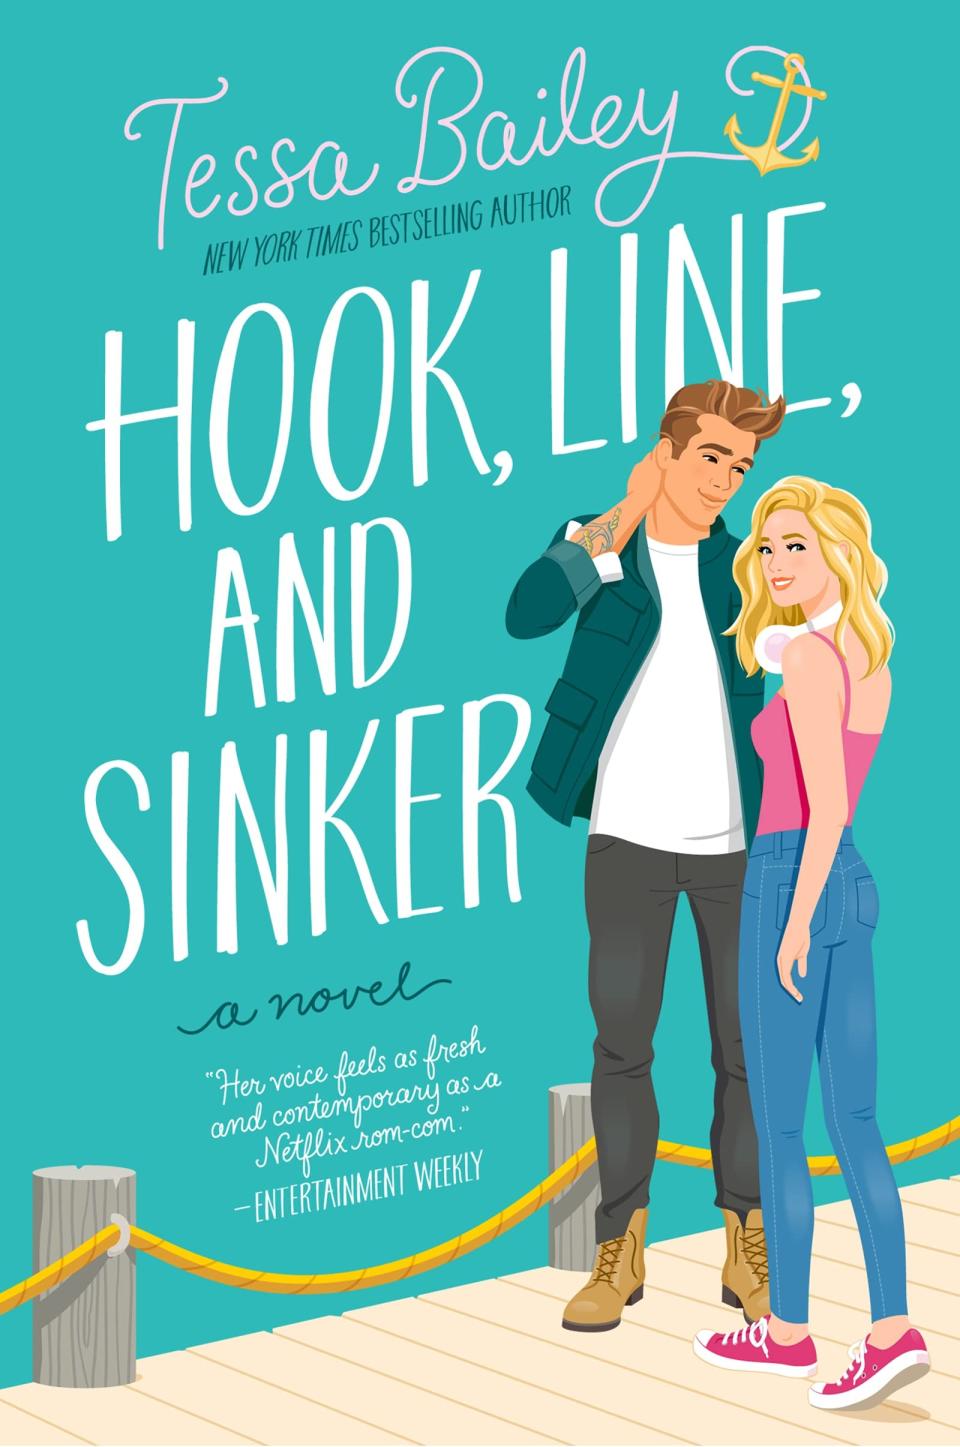 <p>"It Happened One Summer" took the romance world by storm in 2021, and now Tessa Bailey is returning to the world of the Bellinger sisters in <span>"Hook, Line, and Sinker."</span> This time around Hannah takes center stage as she moves into the spare bedroom in her best friend Fox Thornton's apartment. What she doesn't realize is that notorious ladies' man Fox is nursing a serious crush on his best pal, but he's determined not to let it ruin their friendship - even if that means helping her hook-up with a co-worker she can't get out of her head. </p> <p><em>Release date: March 1</em></p>